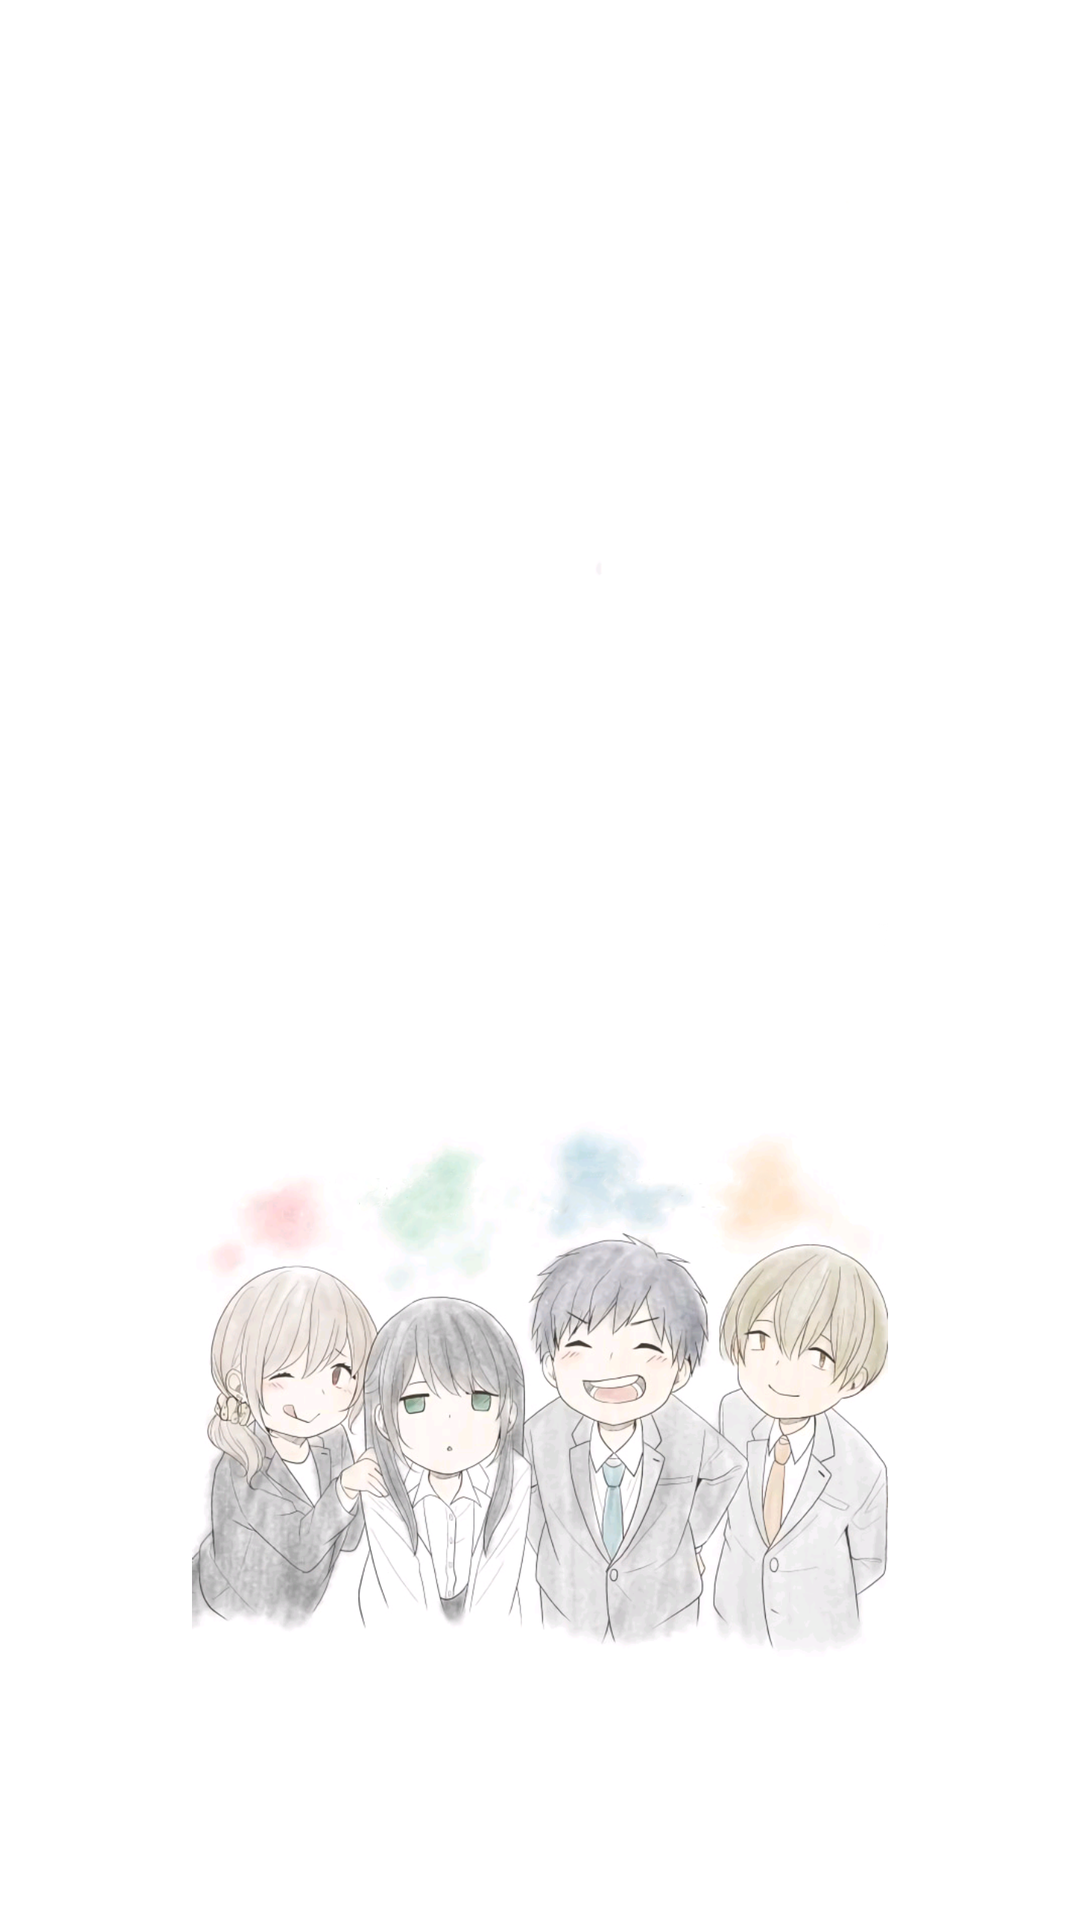 Relife Anime Iphone Wallpapers Wallpaper Cave